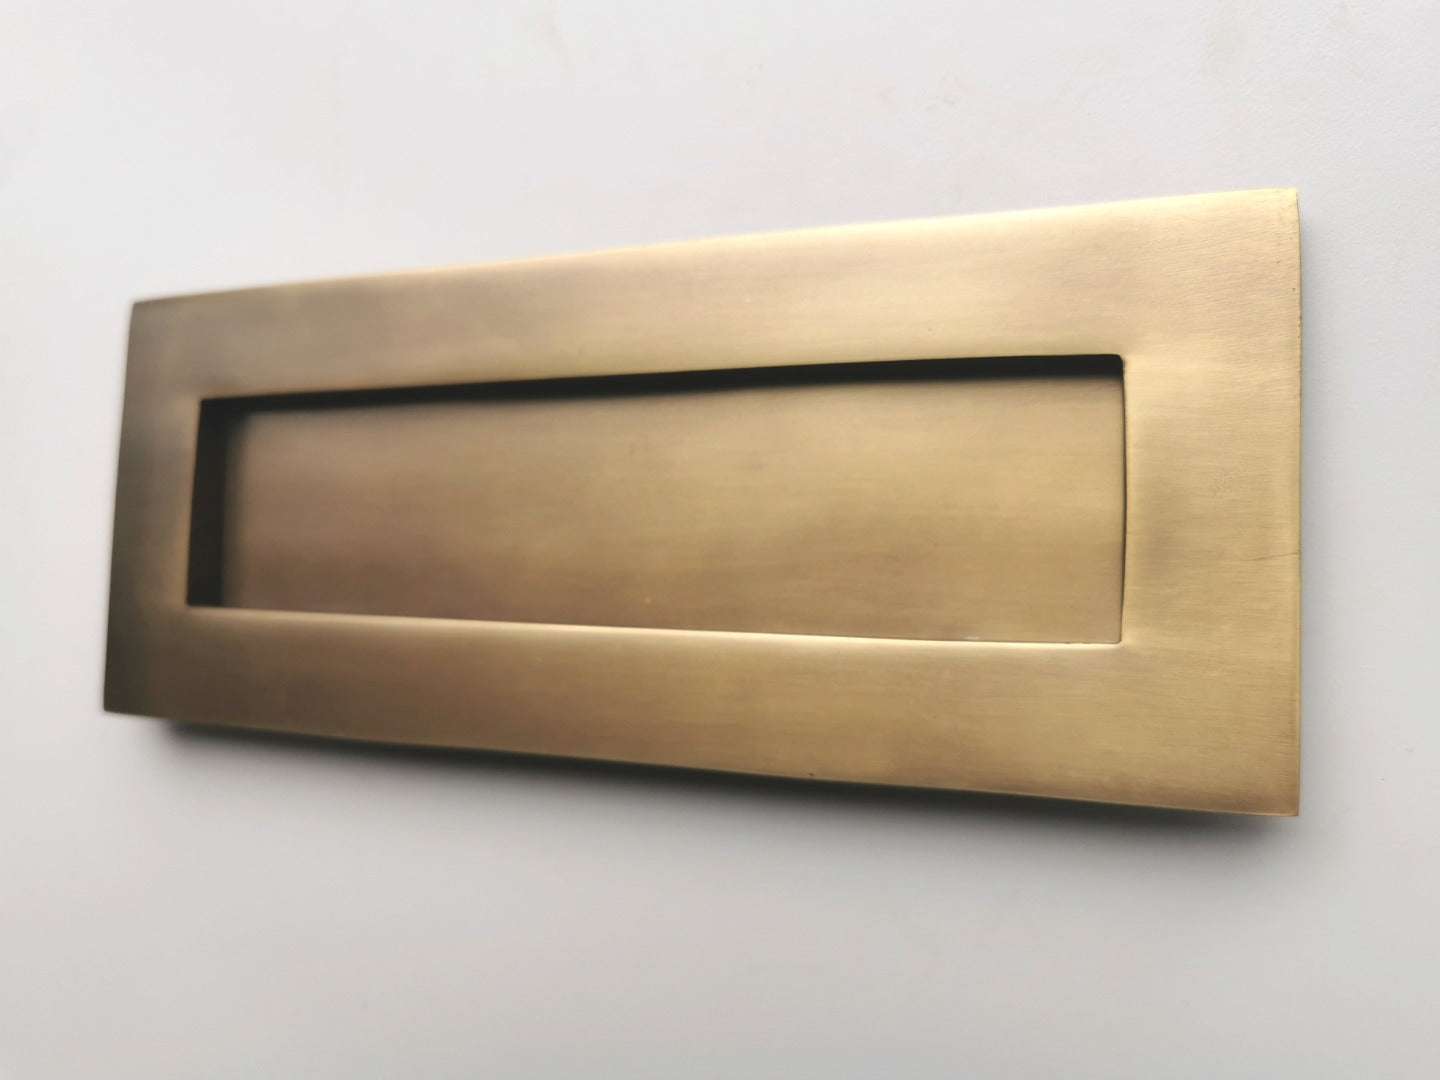 Solid Brass Victorian Letterbox Finished in Antique Satin Brass Letter Plate 10''x4'' High quality Excellent Finish